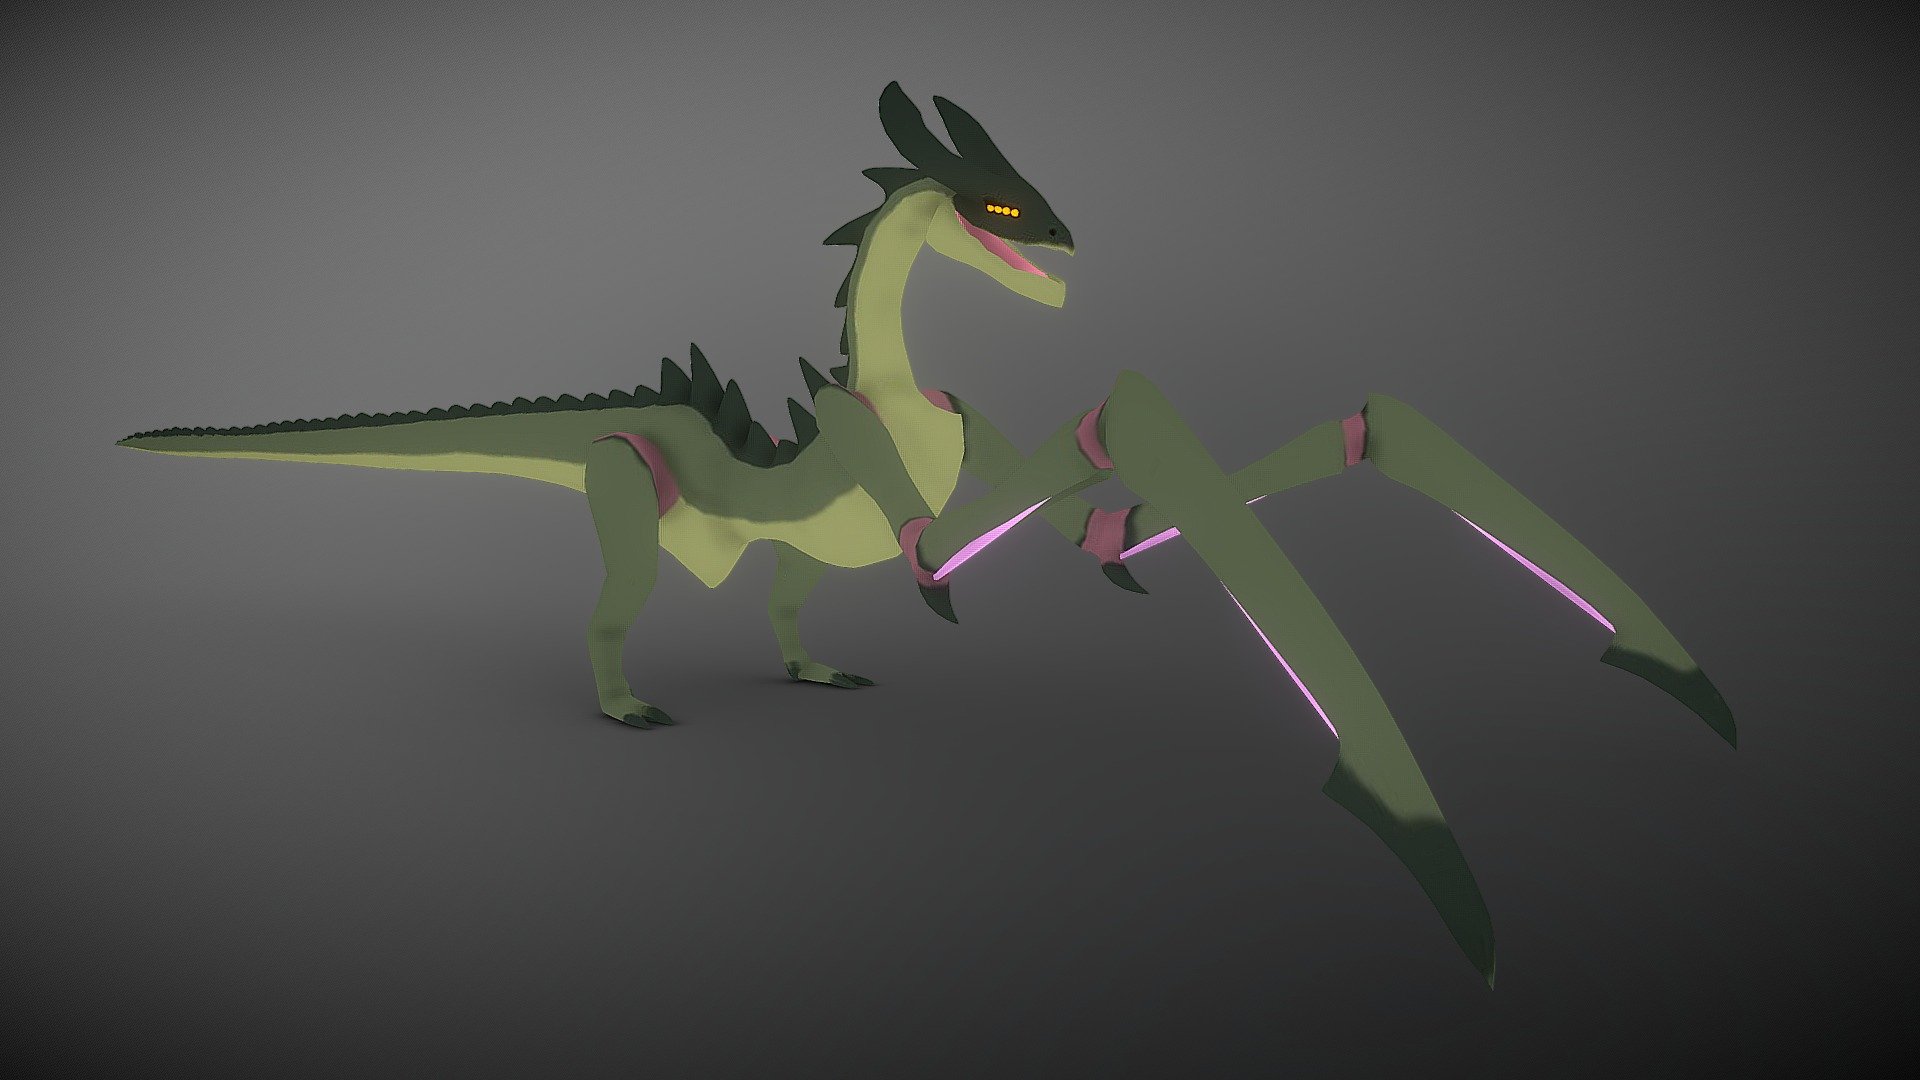 Another stylized 3D model commission. Was tasked with creating a Praying Mantis-like dragon 3d model